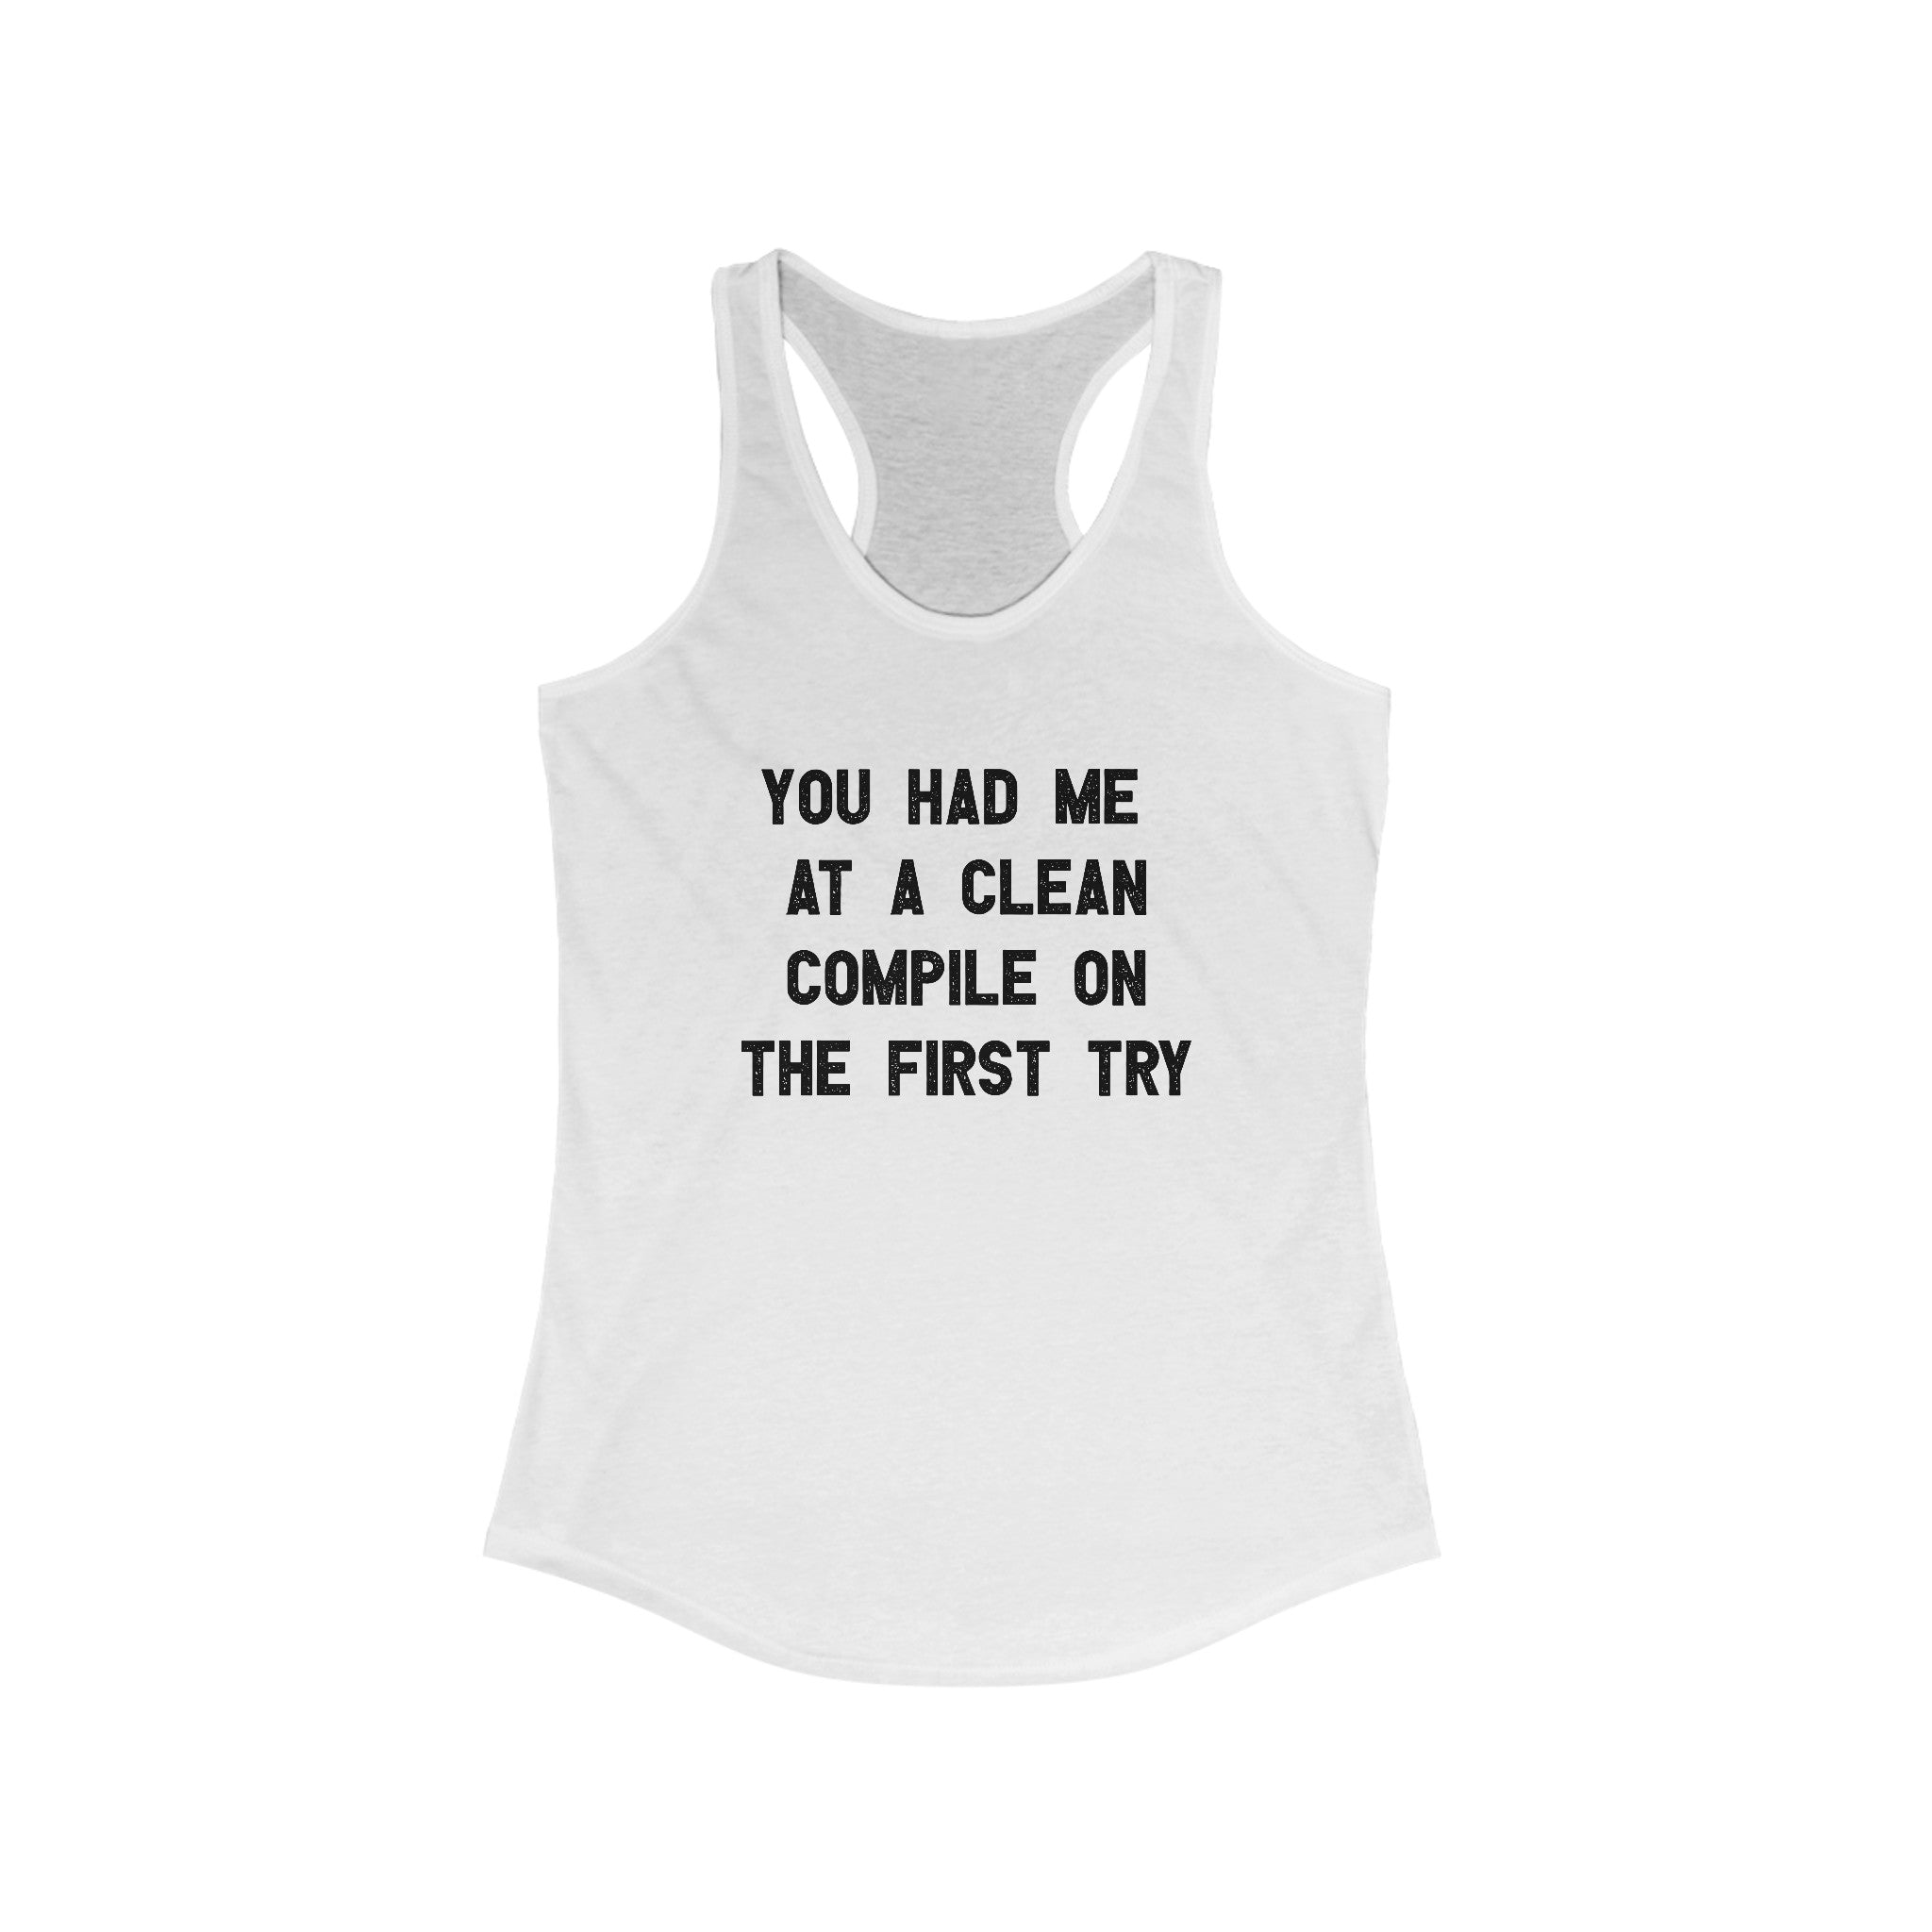 This You Had Me At a Clean Compile on the First Try - Women's Racerback Tank boasts the slogan "YOU HAD ME AT A CLEAN COMPILE ON THE FIRST TRY" in bold black letters, perfect for tech divas who appreciate style and coding success.